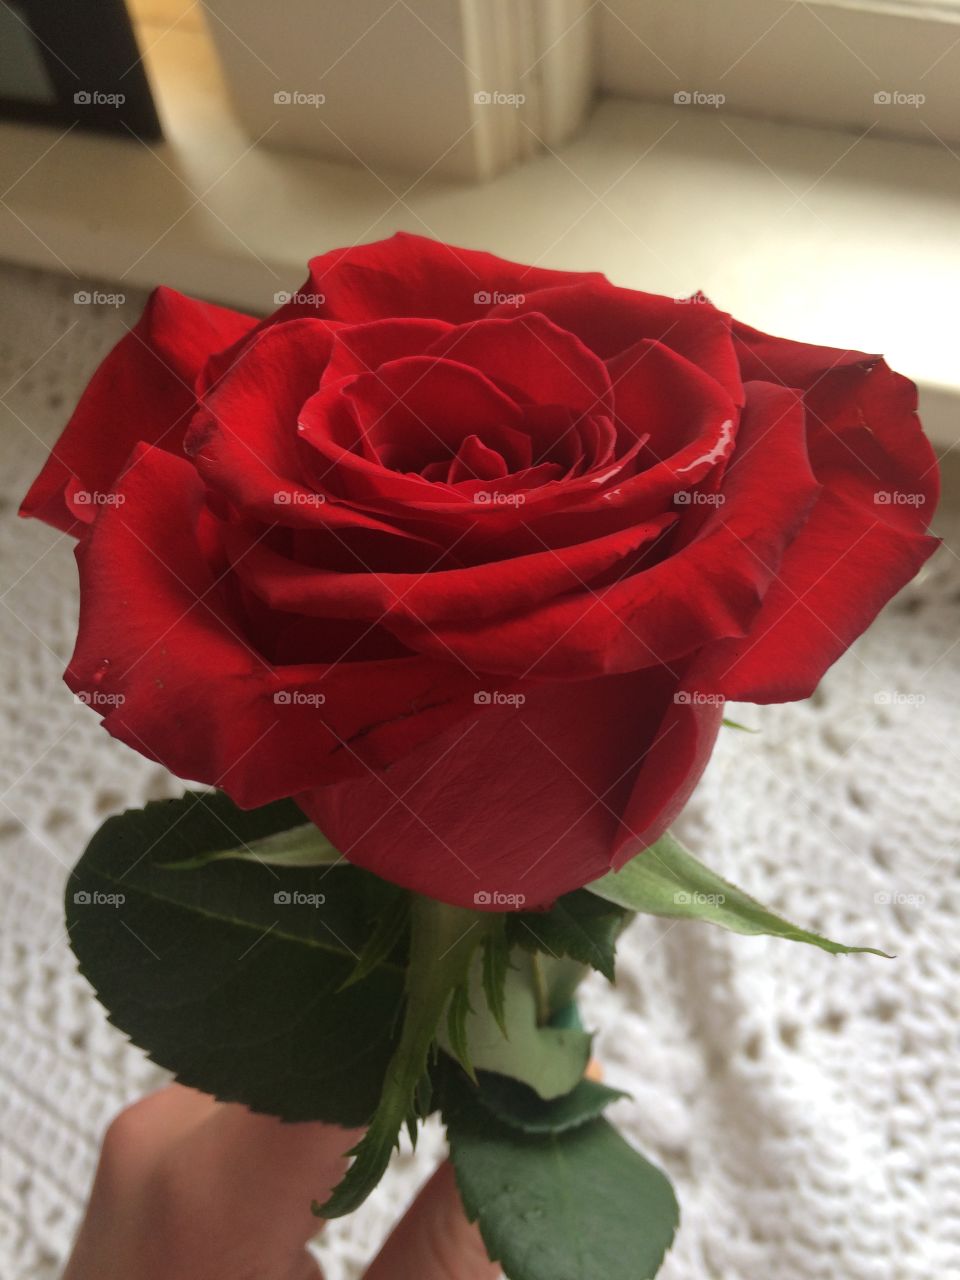 Gorgeous red rose 